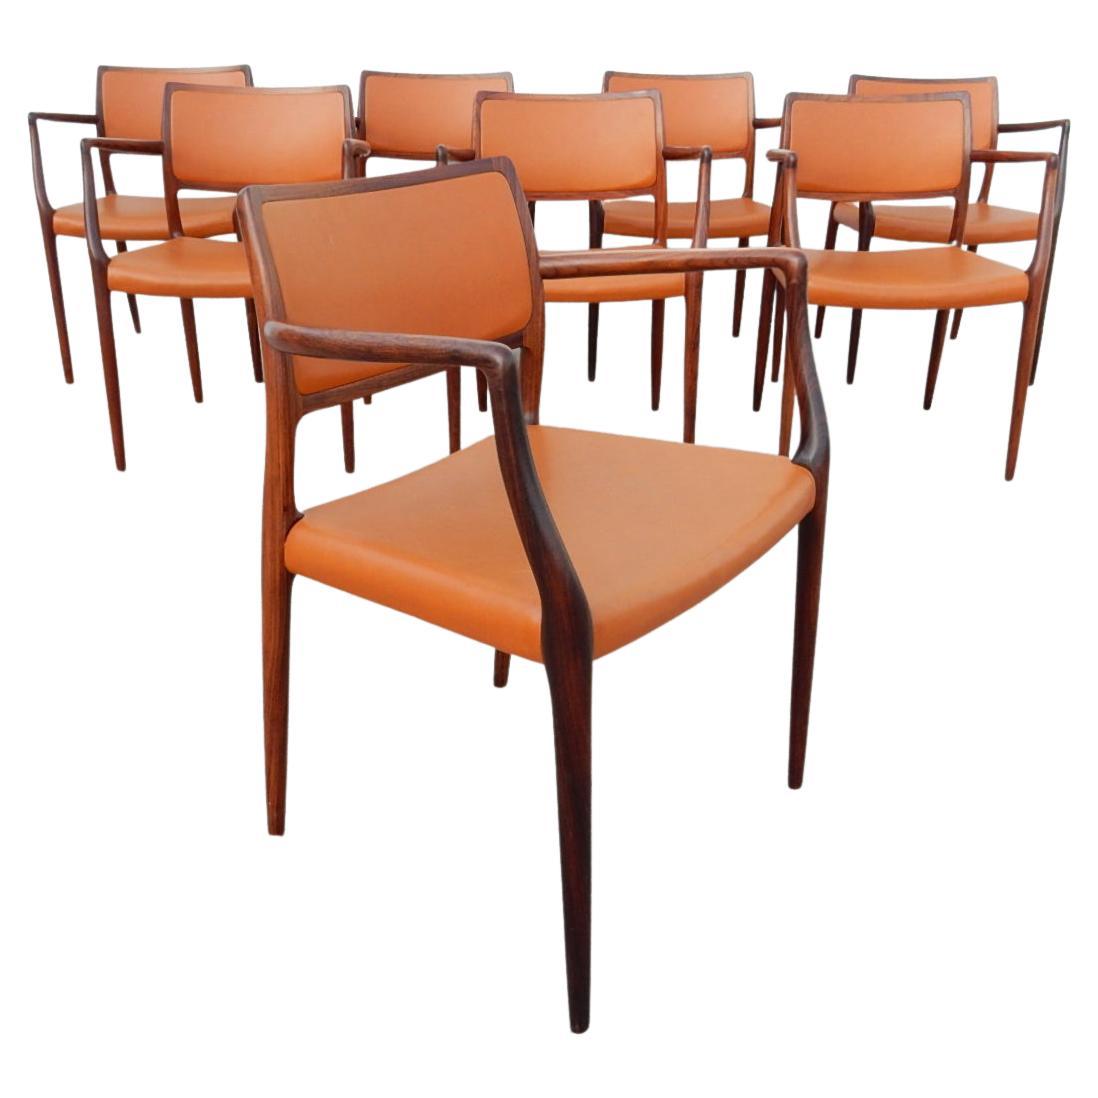 Set of eight exotic rosewood and vinyl armchairs designed by Niels Otto Møller for T.L. Moller of Denmark, chair model #65.
Gorgeous, elegant chairs with sleek lines and amazing wood grain.
All are marked with T.L. Moller brand.

Each chair has been